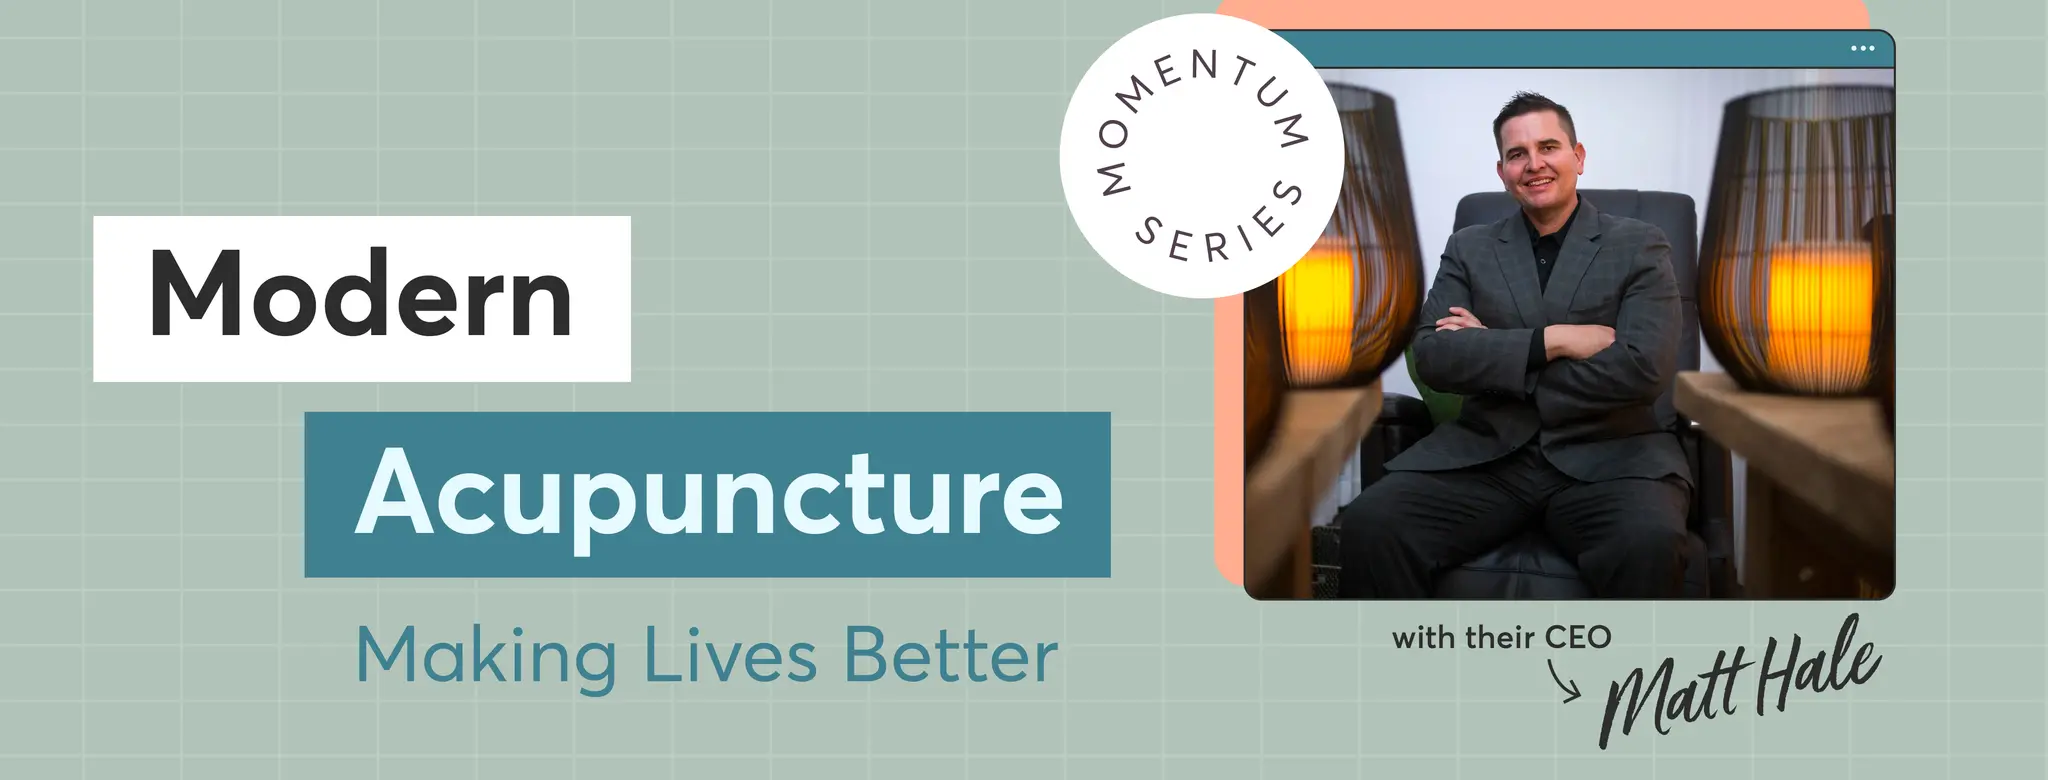 Modern Acupuncture: Making Lives Better